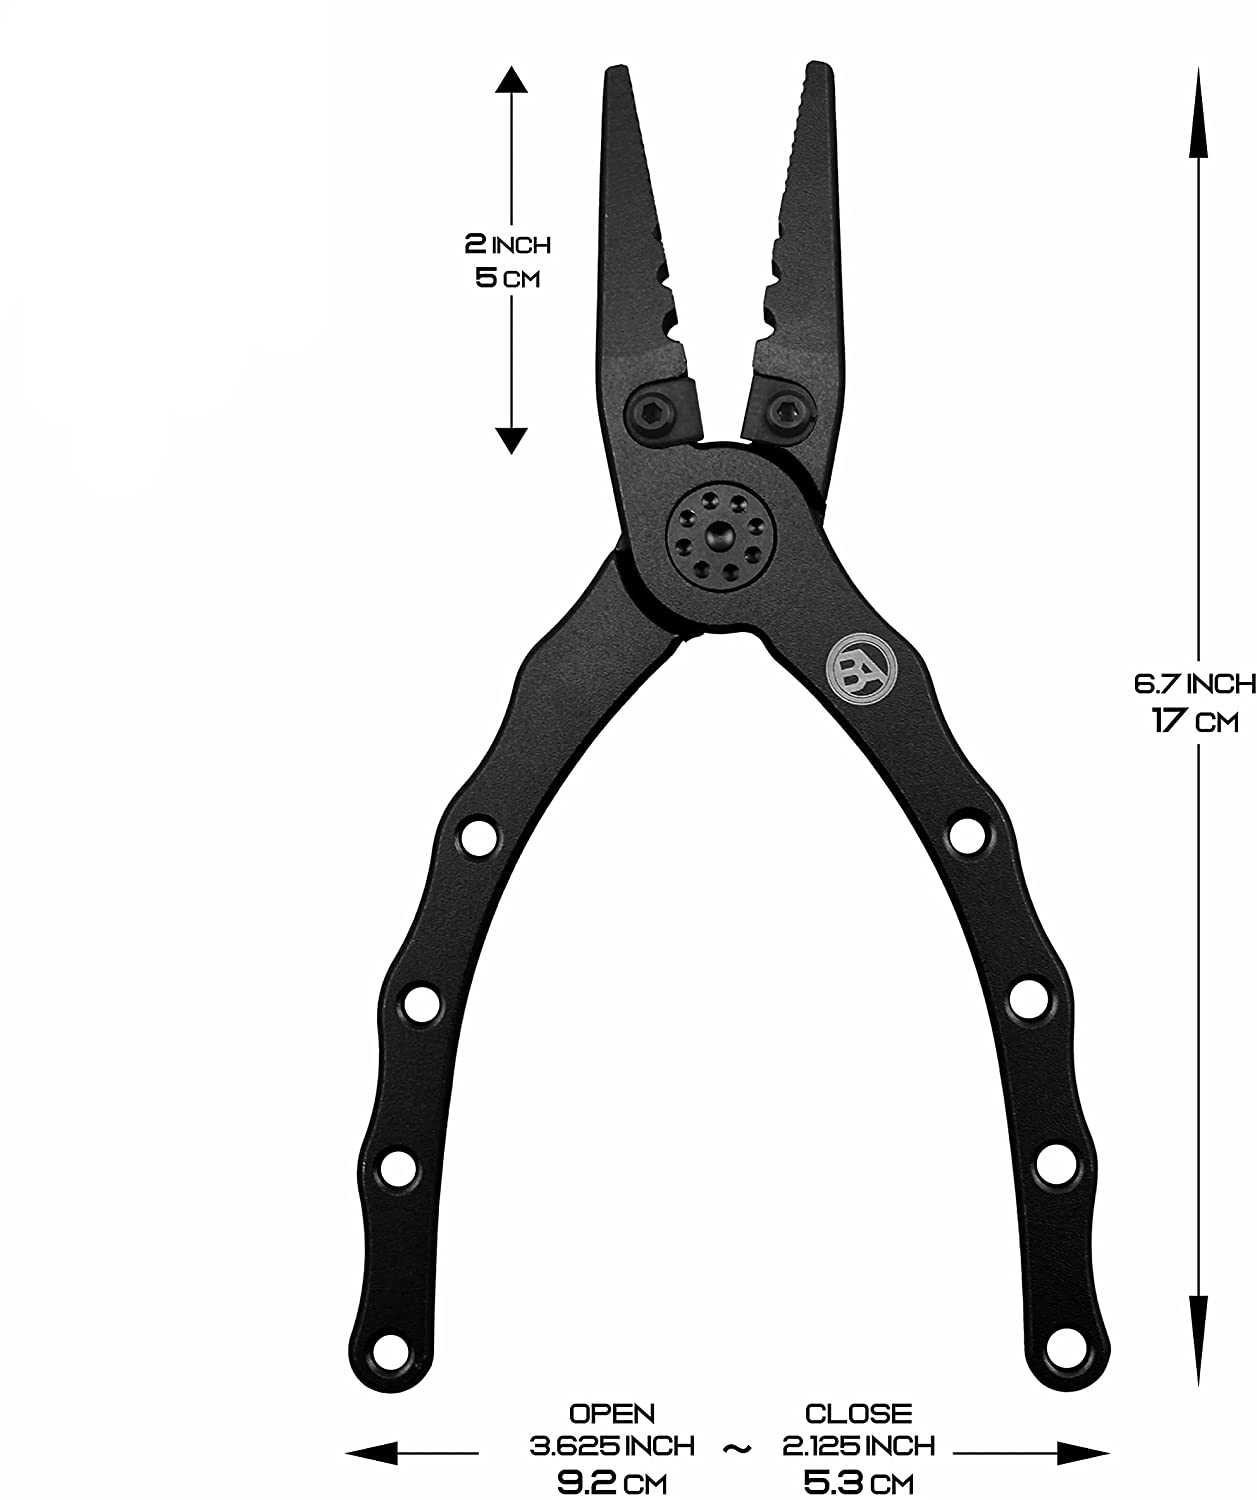 Black Anchor Aluminum Fishing Pliers 6.7" Saltwater Resistant Anodization, Mono, Fluoro & Braid Line Cutters, Nylon Sheath with Belt Loop